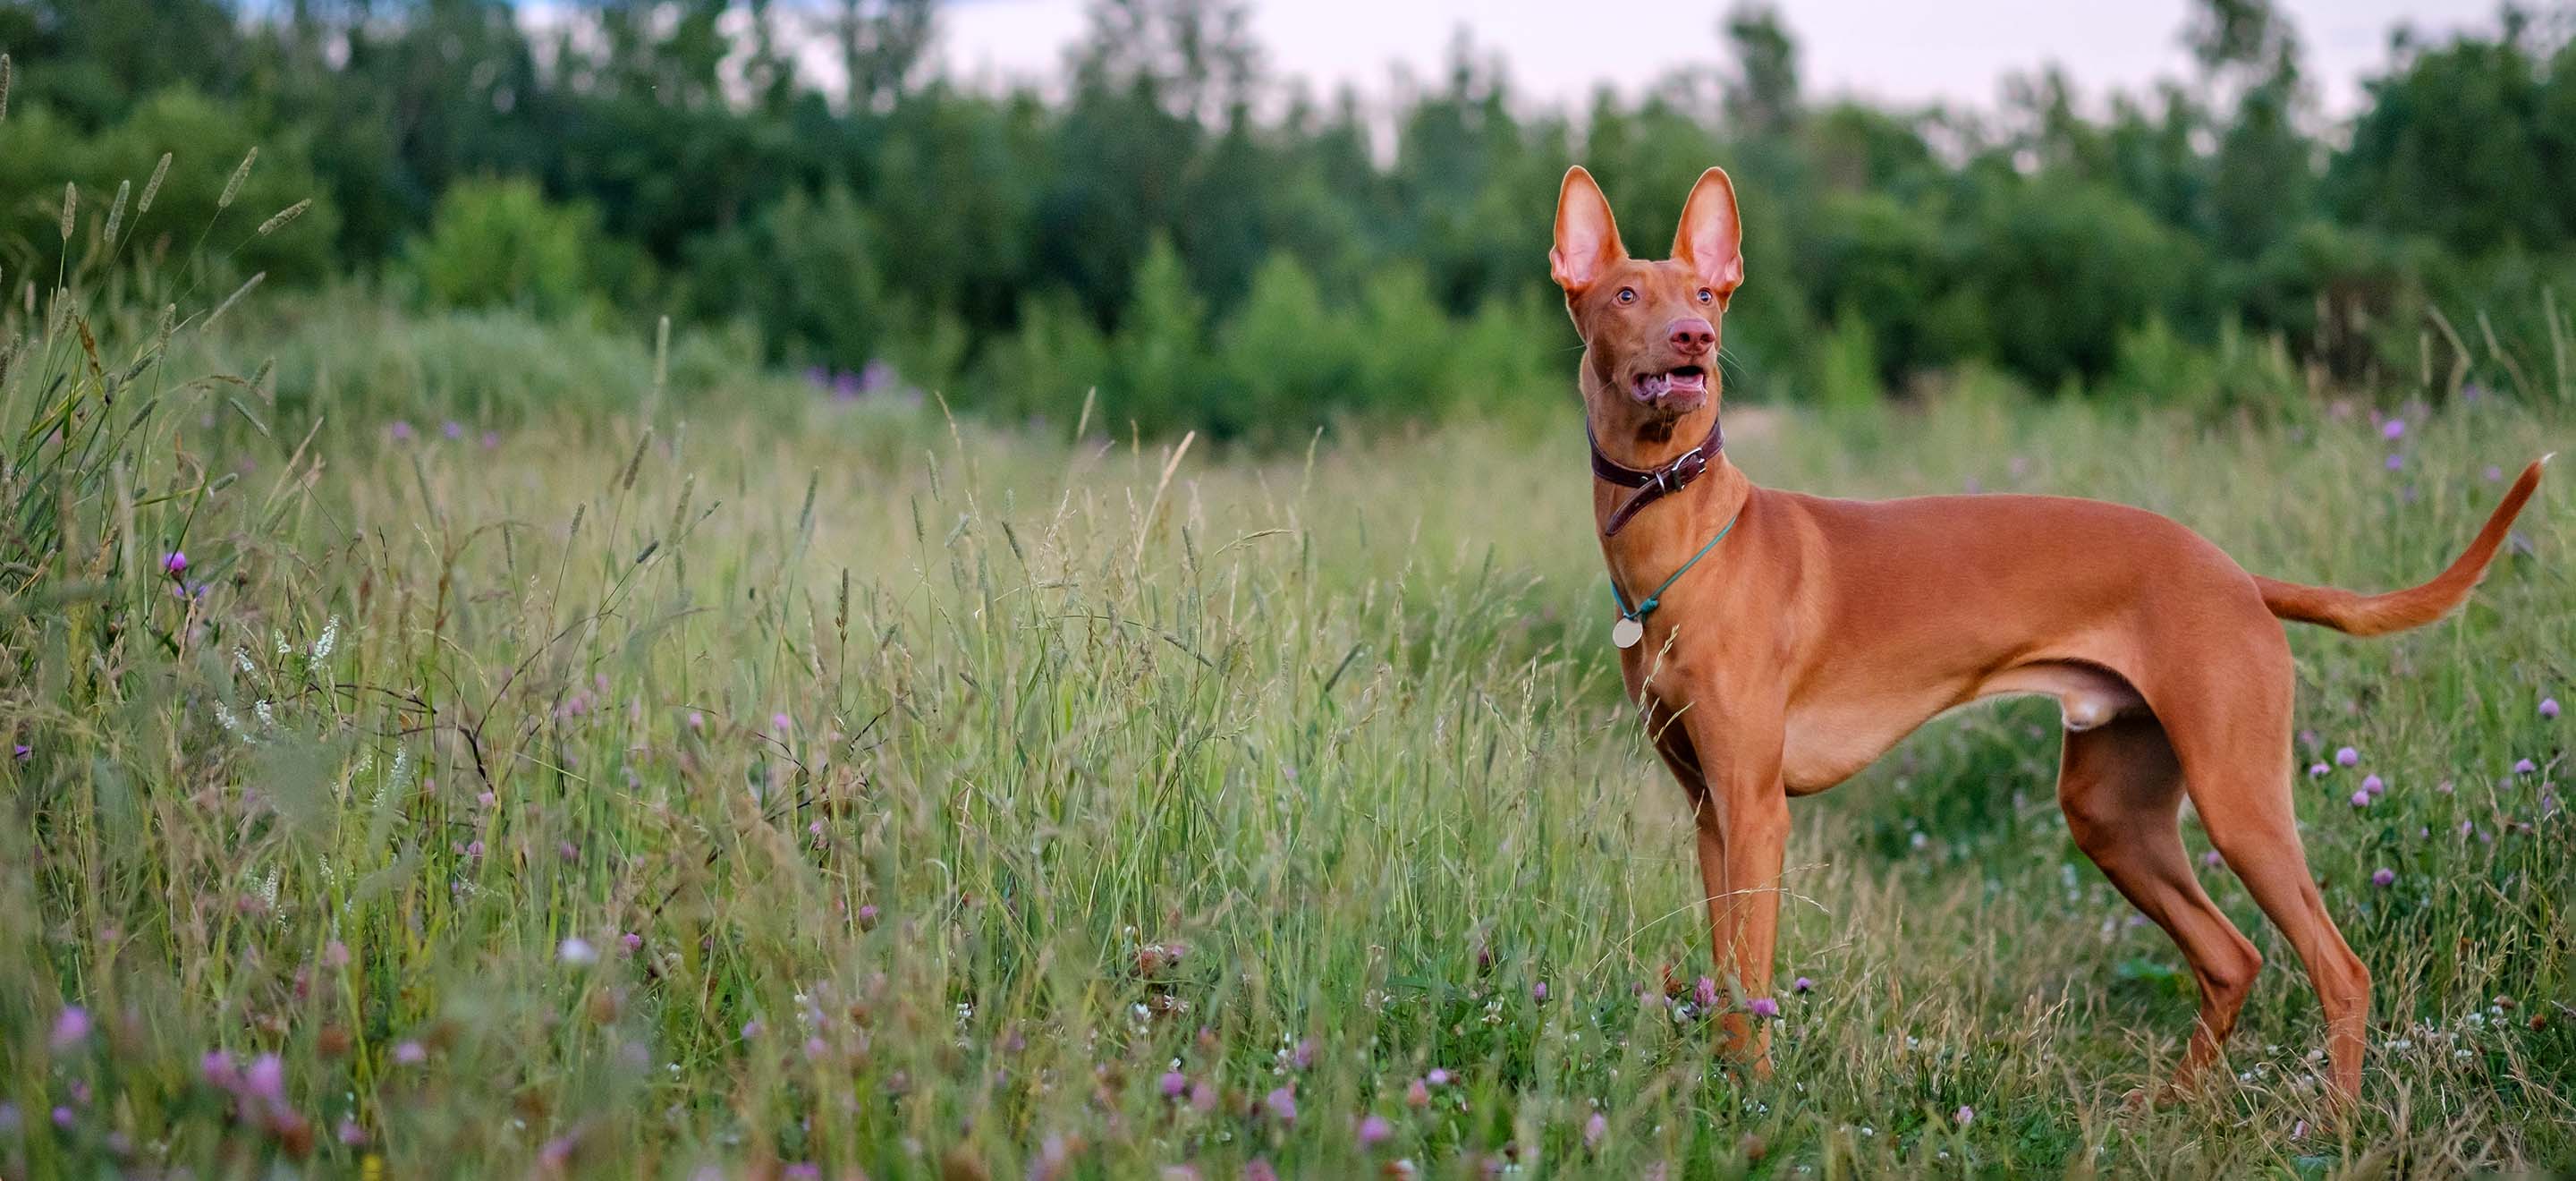 A red Pharaoh Hound standing in a tall grass and wildflower field image